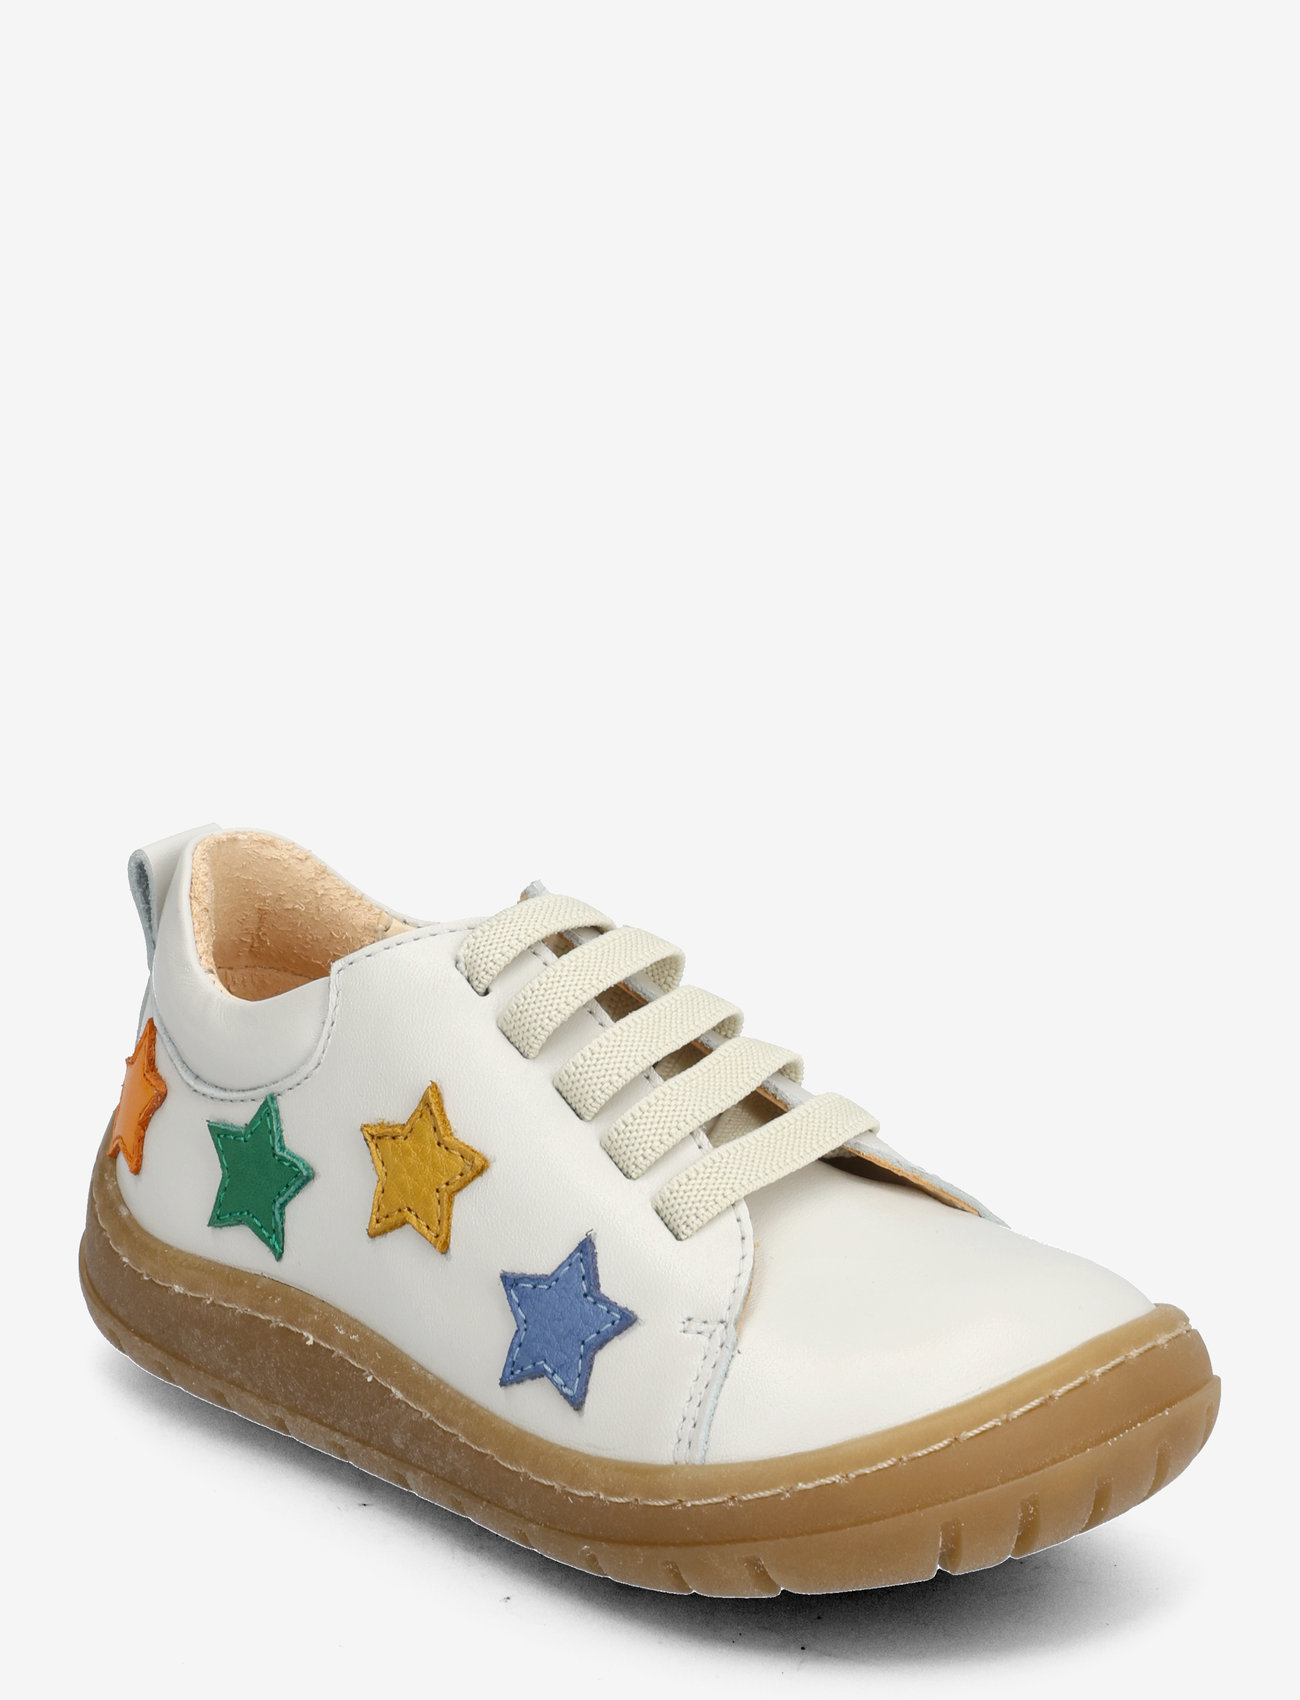 ANGULUS - Shoes - flat - with lace - sommerschnäppchen - 1493/a006 off white/stars - 0